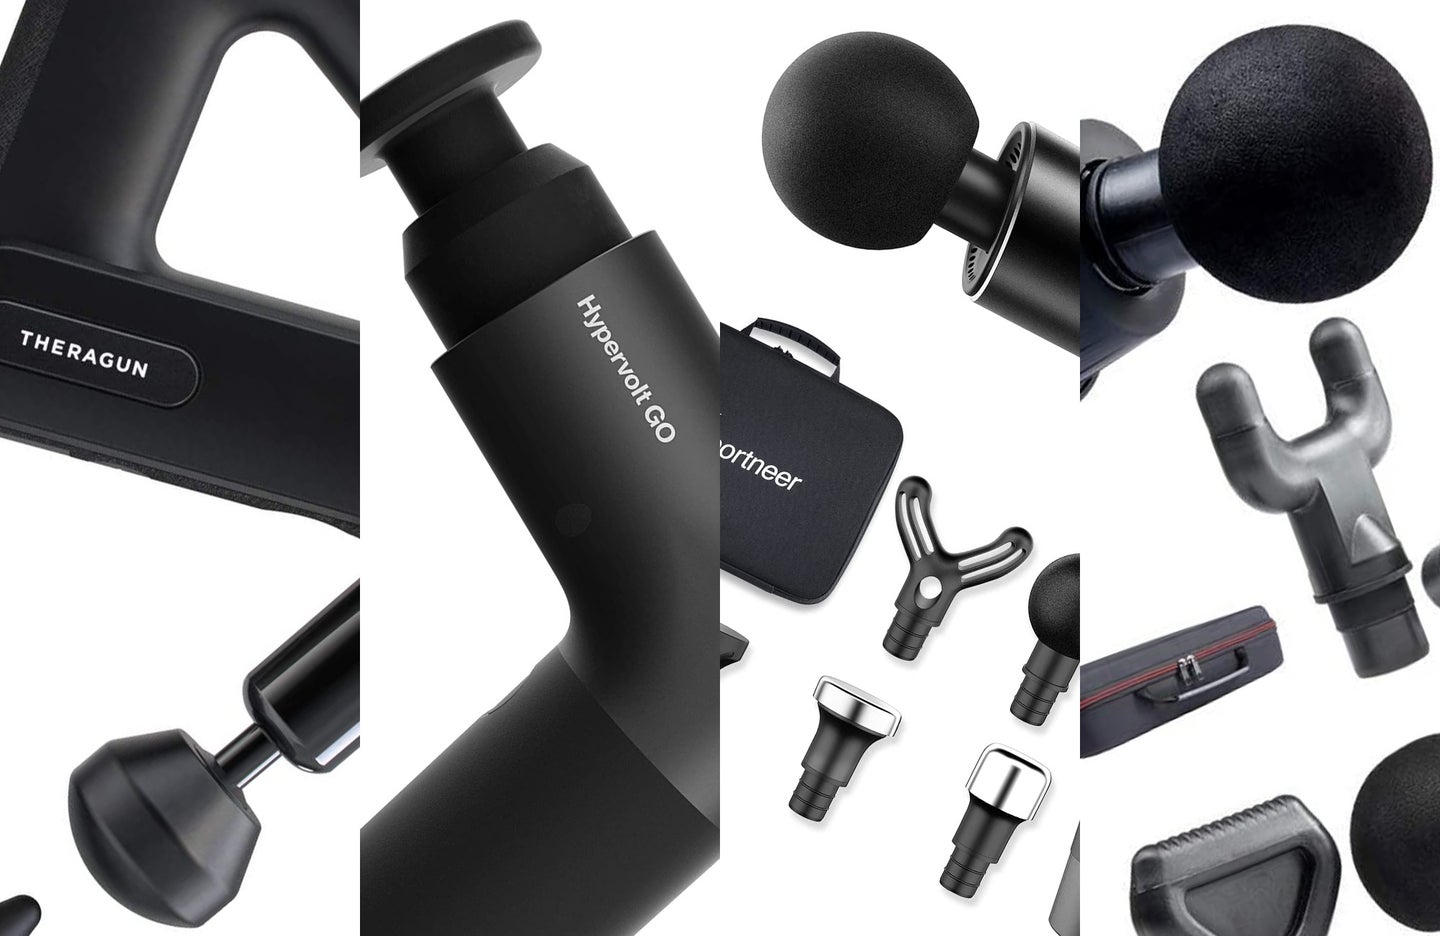 A lineup of the best percussion massagers on a white background